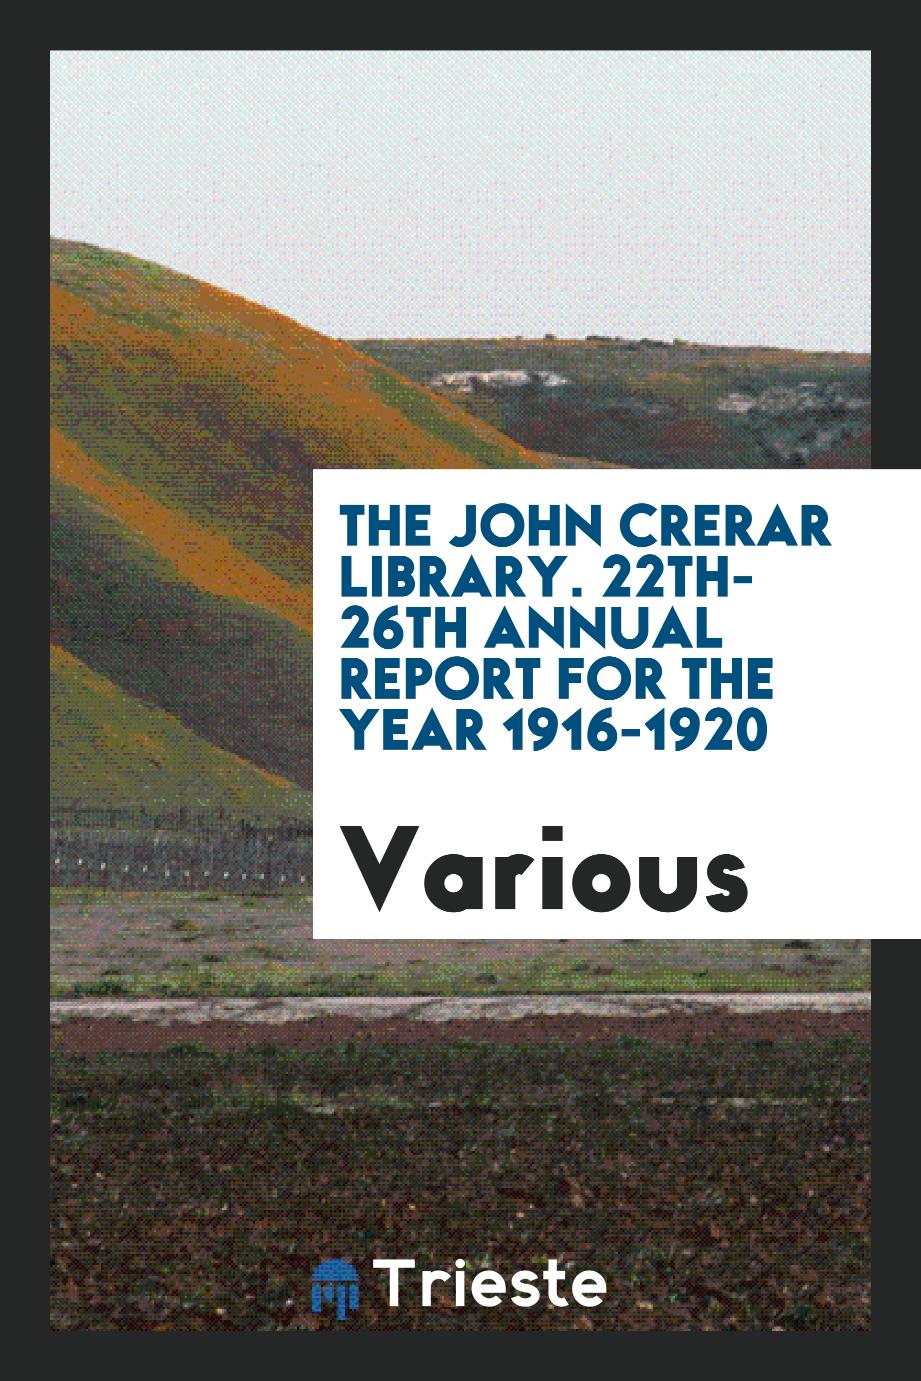 The John Crerar library. 22th-26th Annual report for the year 1916-1920